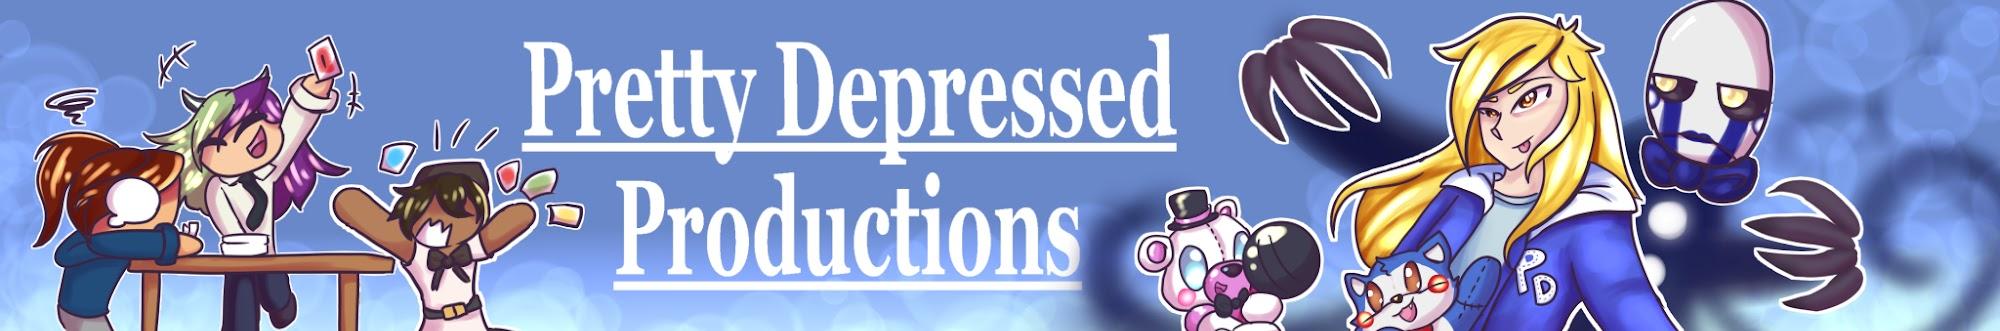 Pretty Depressed Productions